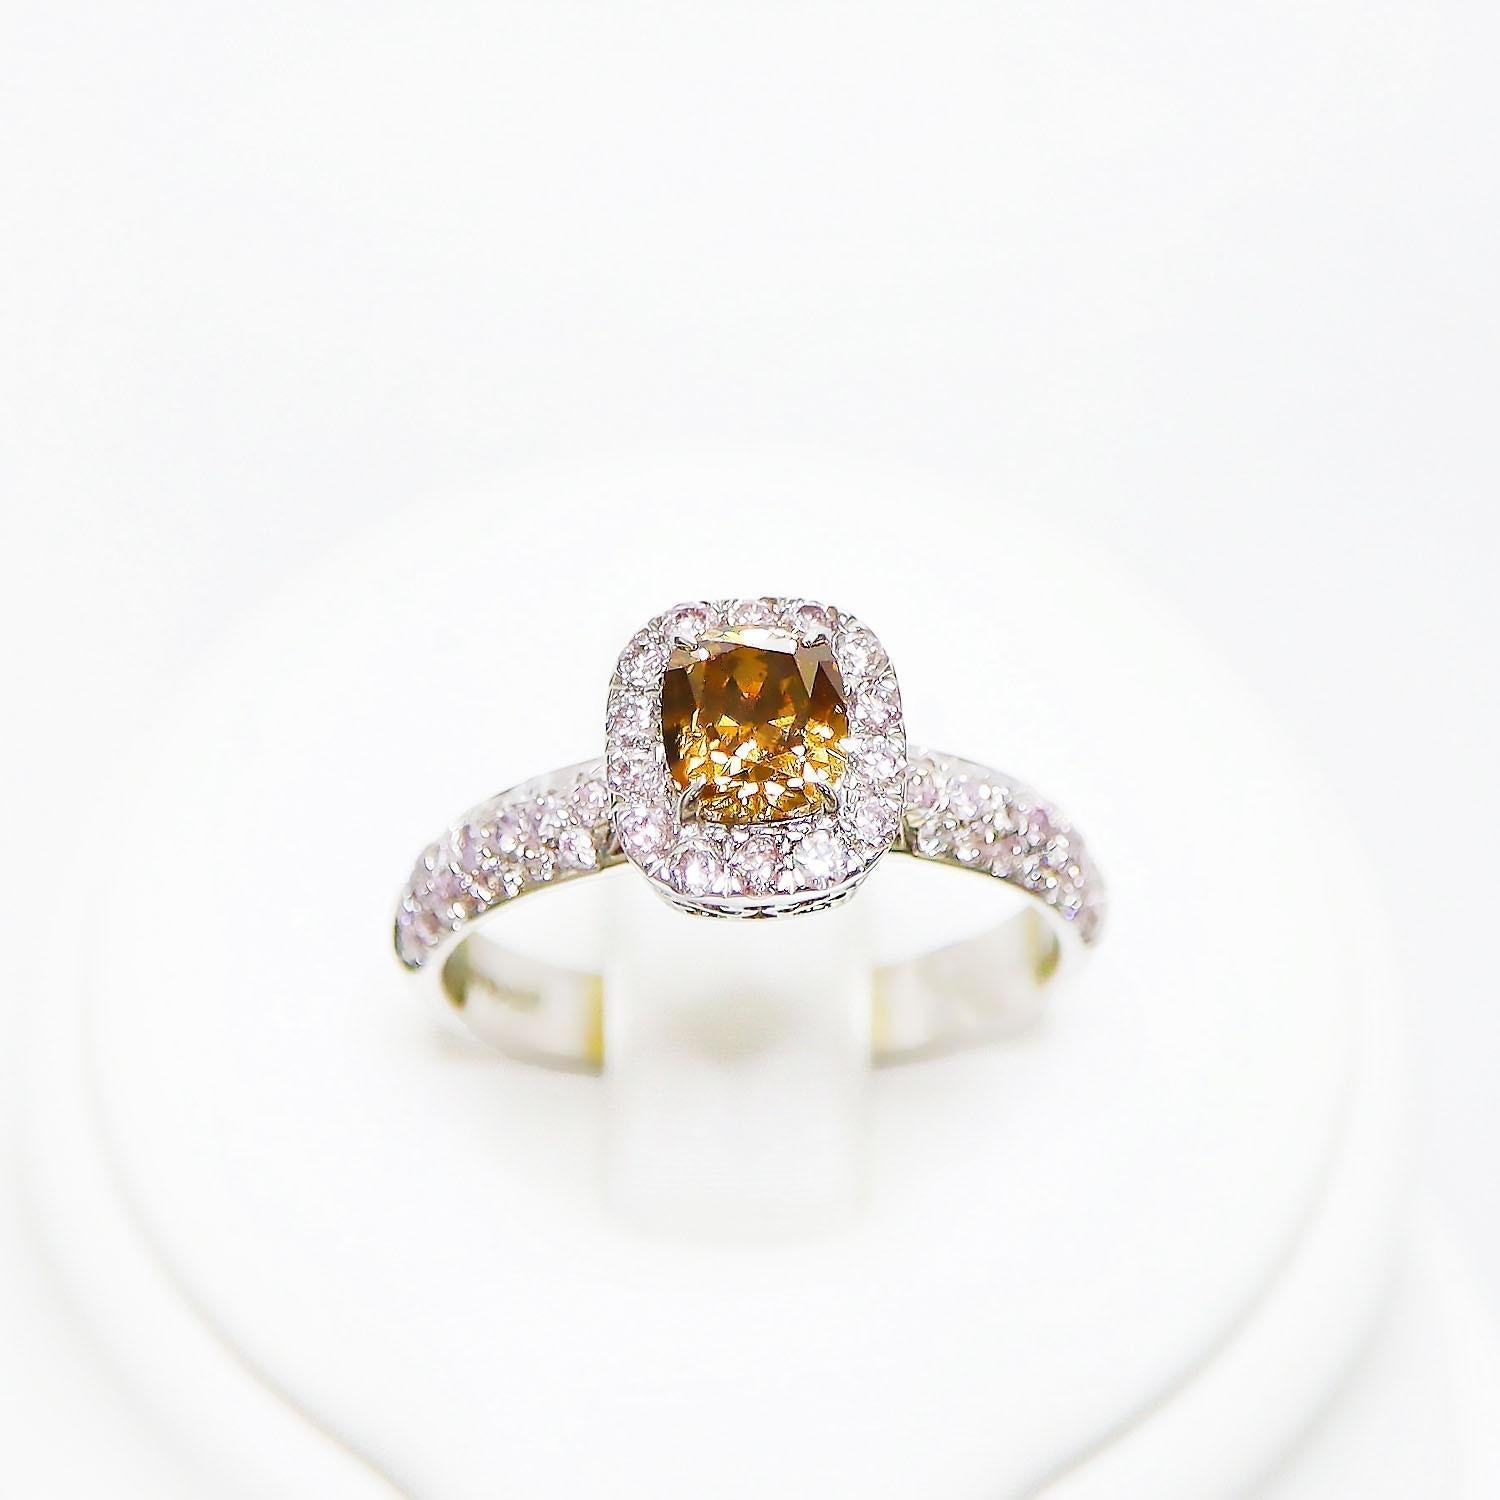 IGI 14K 0.76 Ct Yellow&Pink Diamonds Antique Art Deco Style Engagement Ring In New Condition For Sale In Kaohsiung City, TW